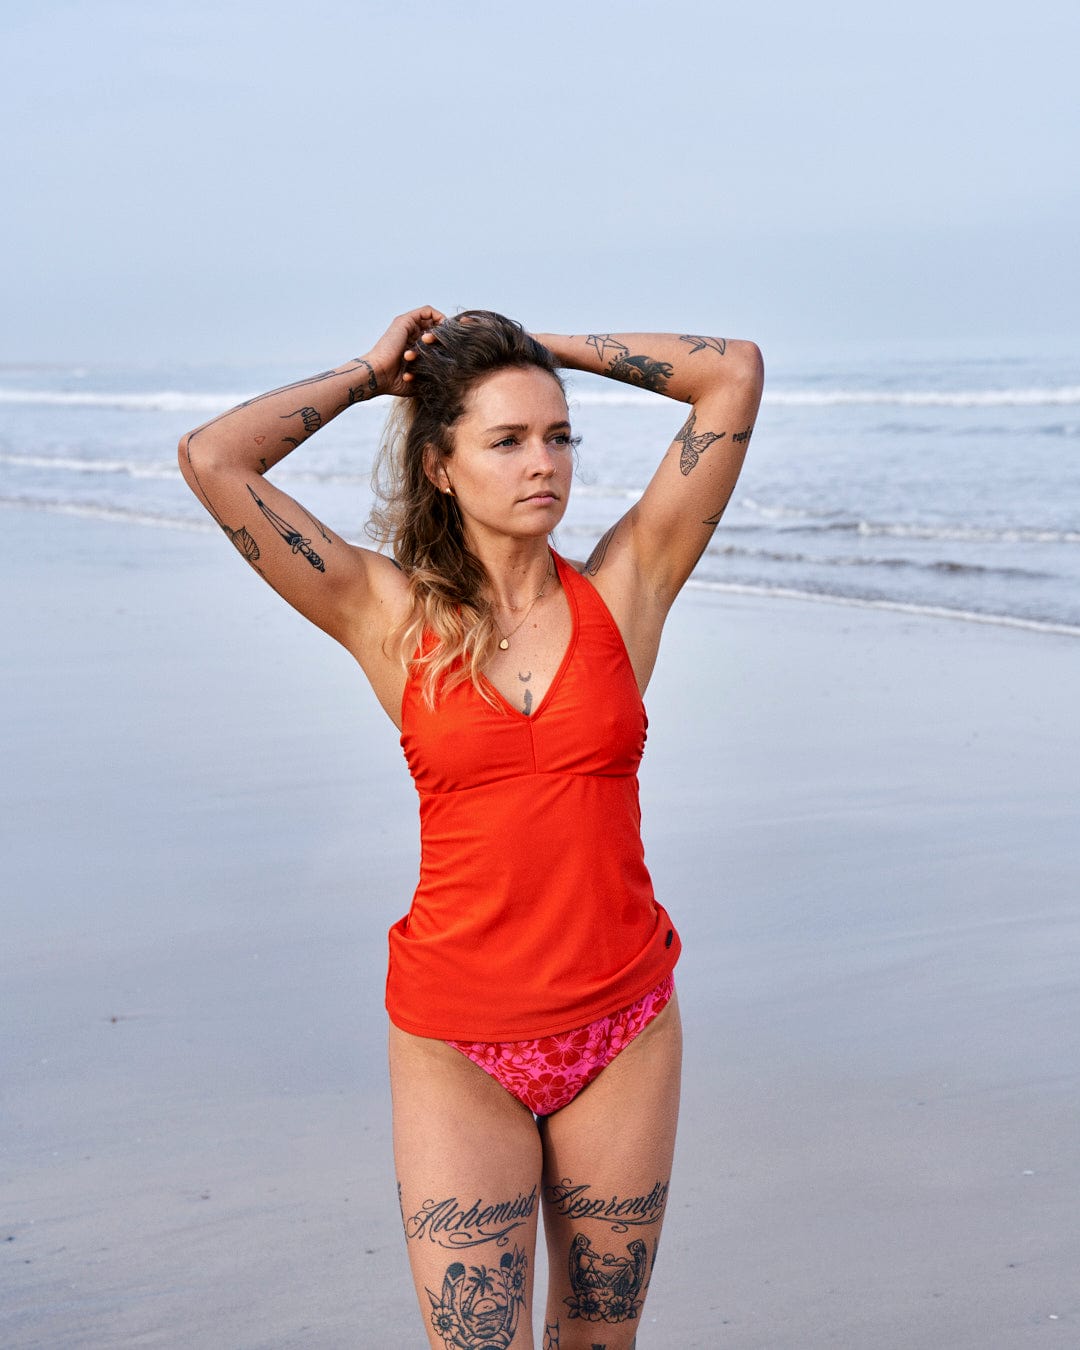 A woman in Caeley - Recycled Womens Hibiscus Bikini Bottoms - Pink by Saltrock with tattoos stands on a beach, hands lifting her hair, looking to the side.